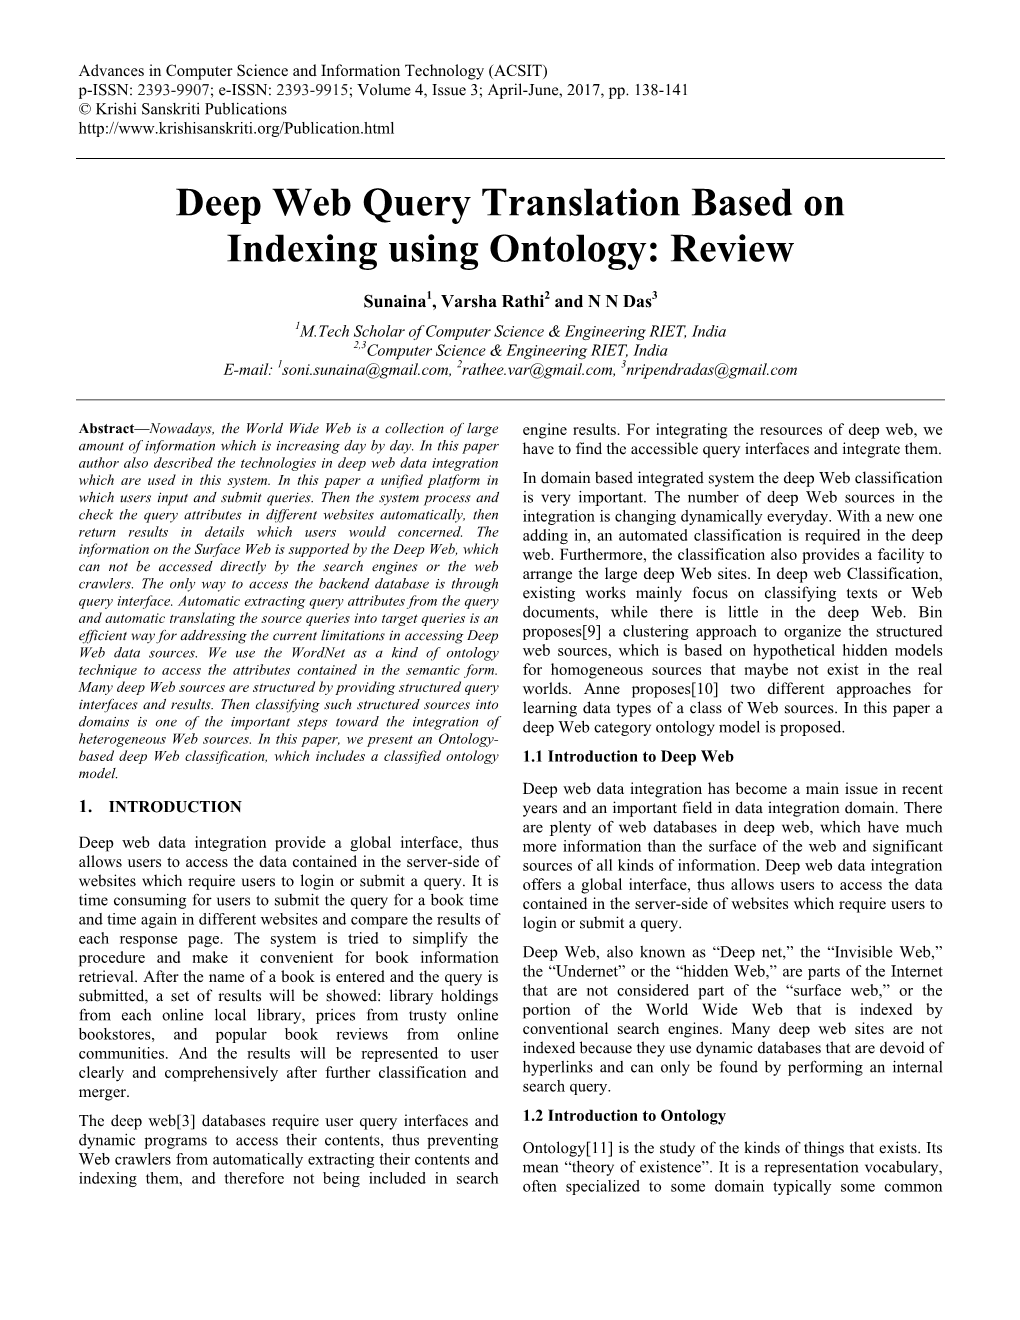 Deep Web Query Translation Based on Indexing Using Ontology: Review